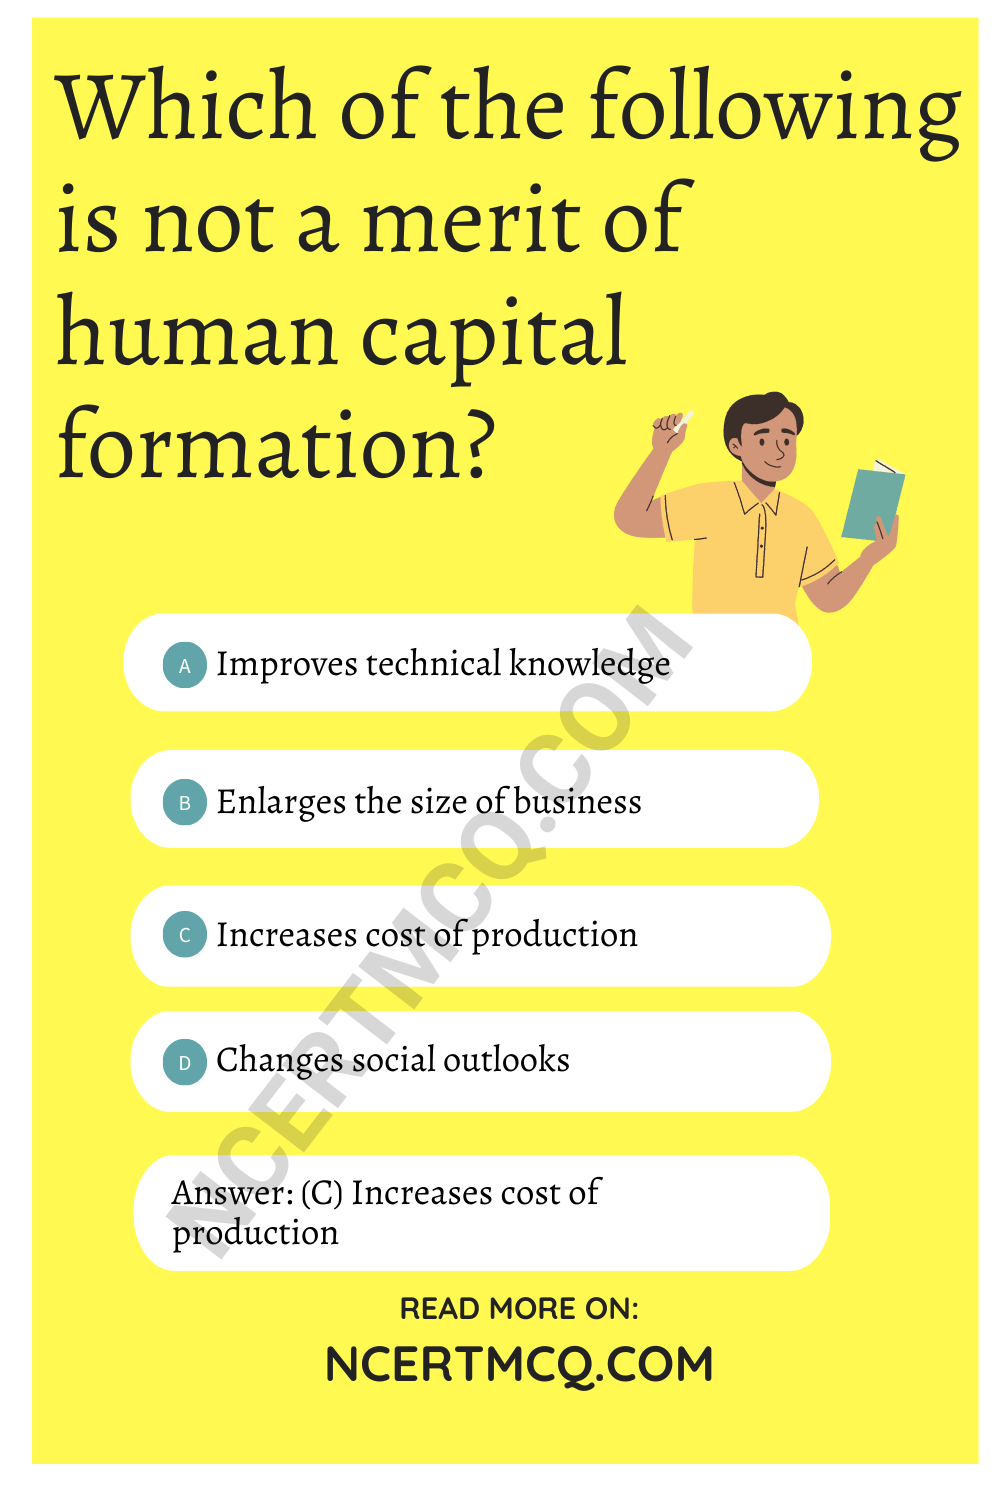 Which of the following is not a merit of human capital formation?